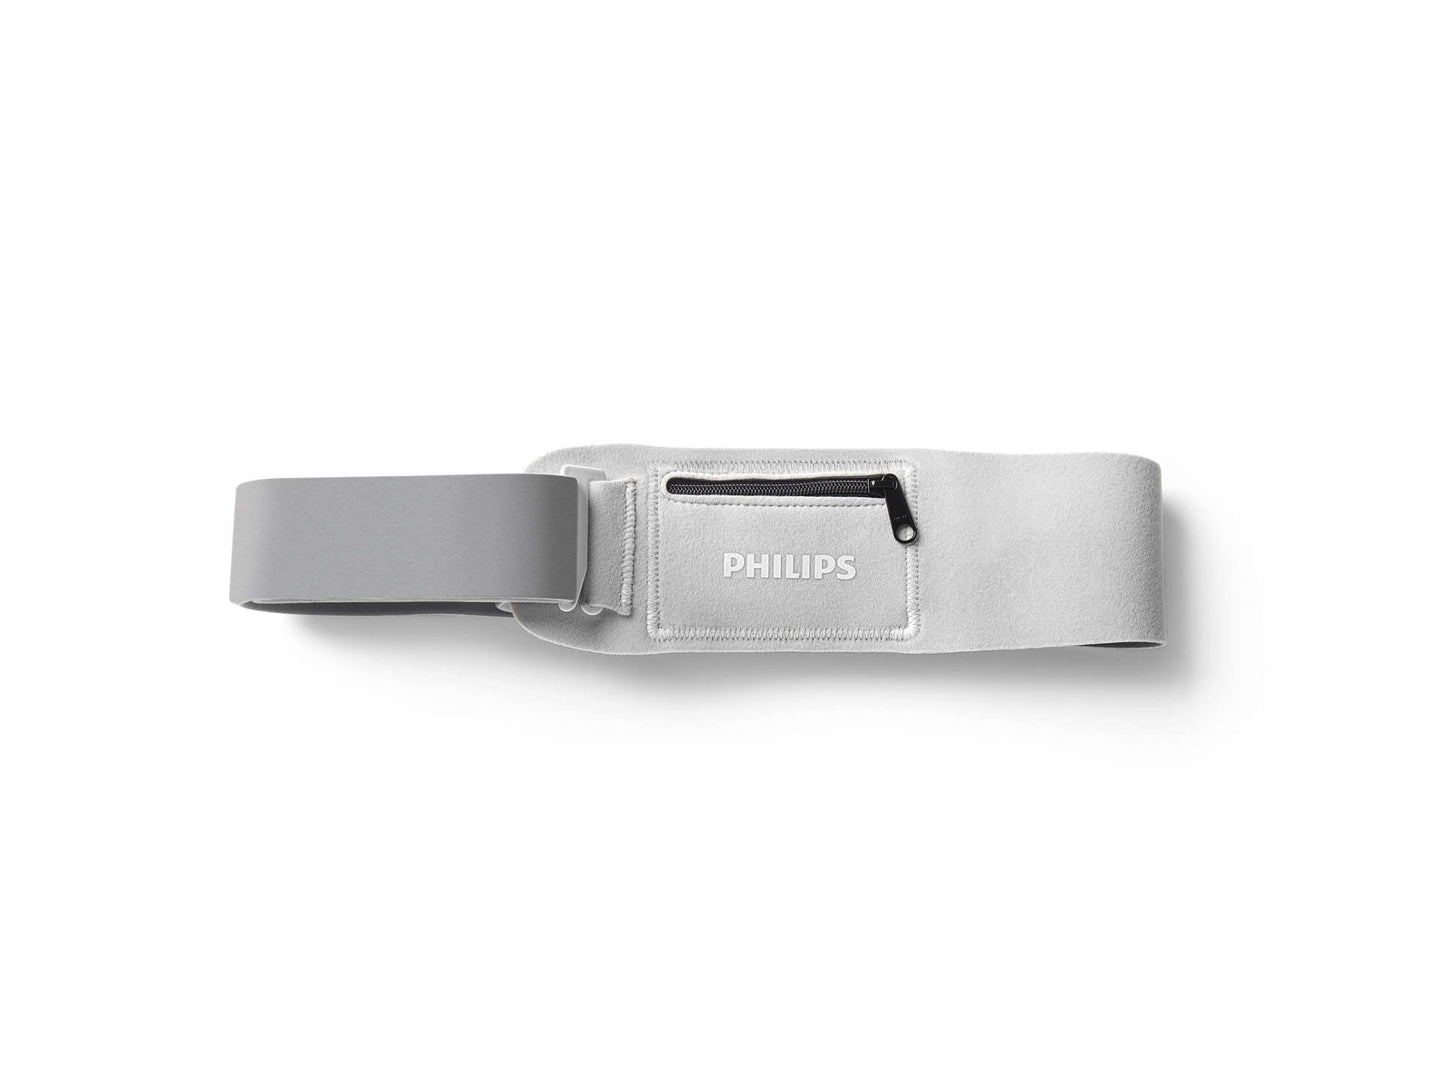 Philips replacement chest strap for NightBalance